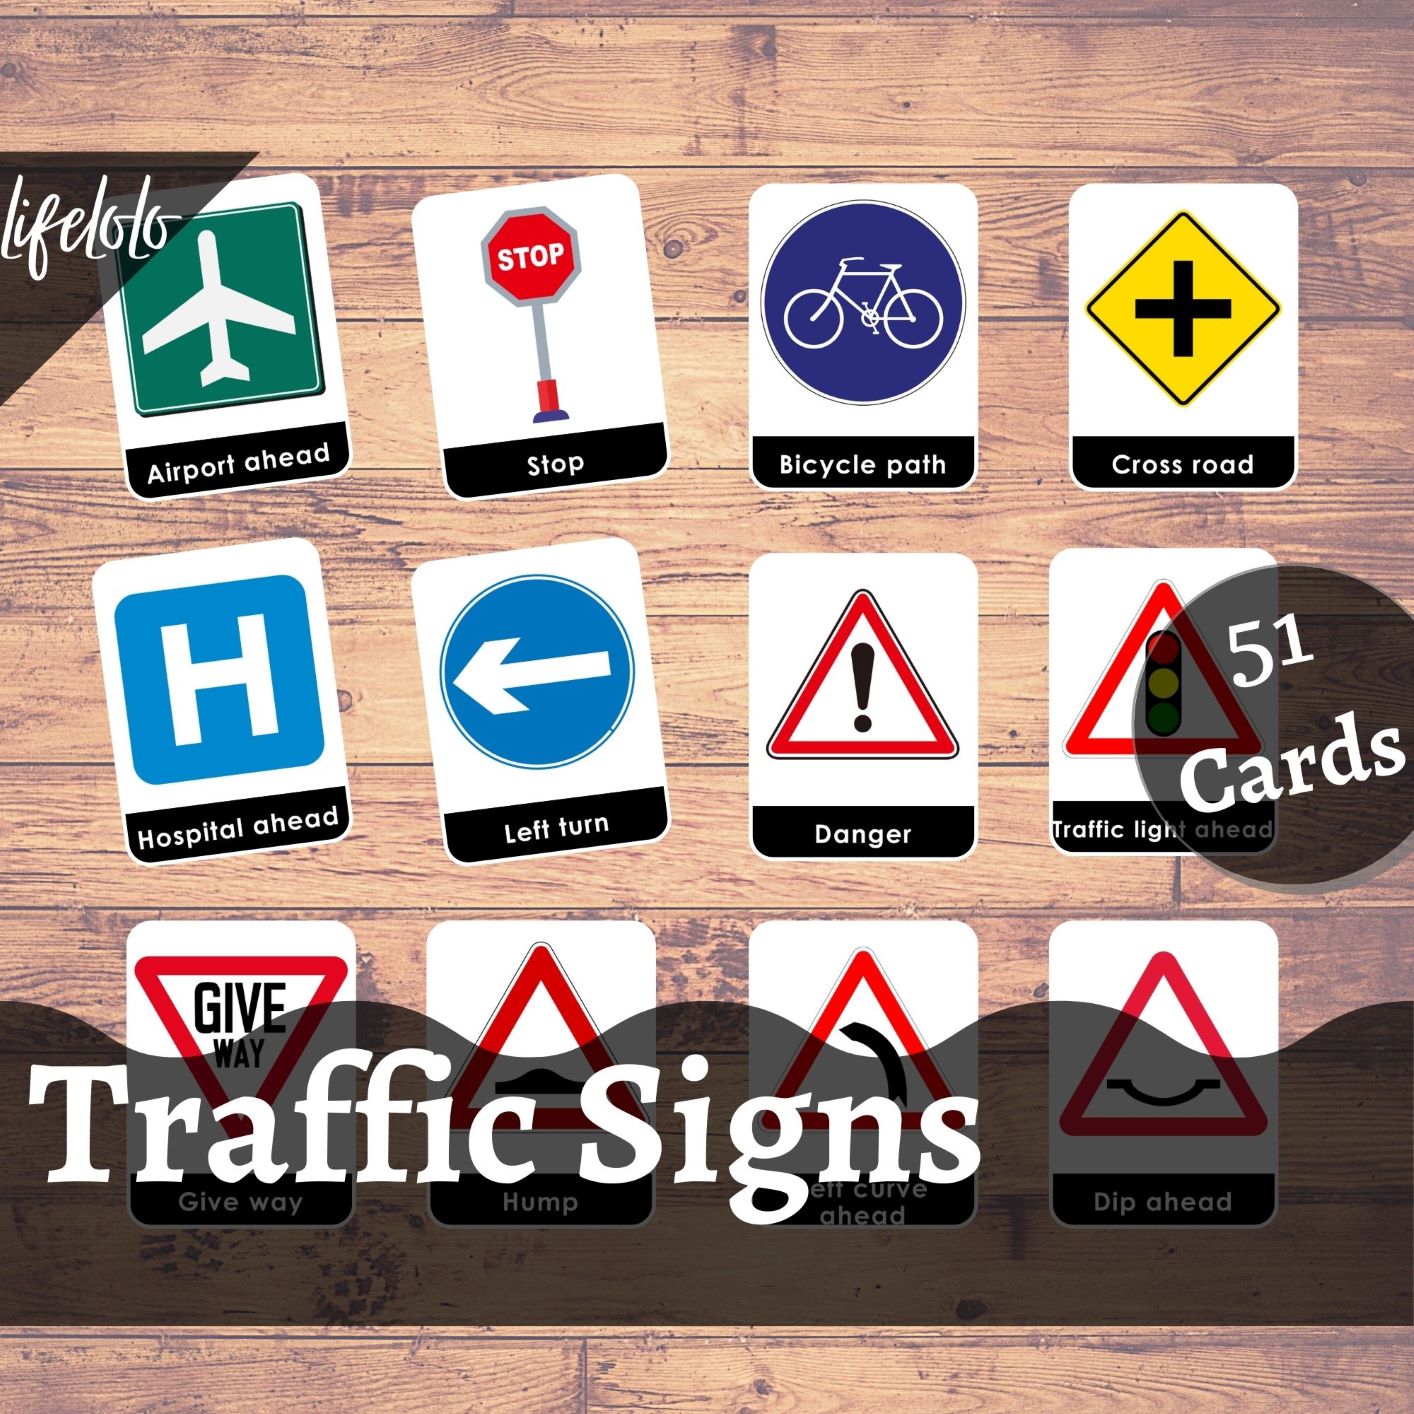 TRAFFIC SIGNS - 51 Flash Cards | Street Signs | Road Signs | Montessori ...